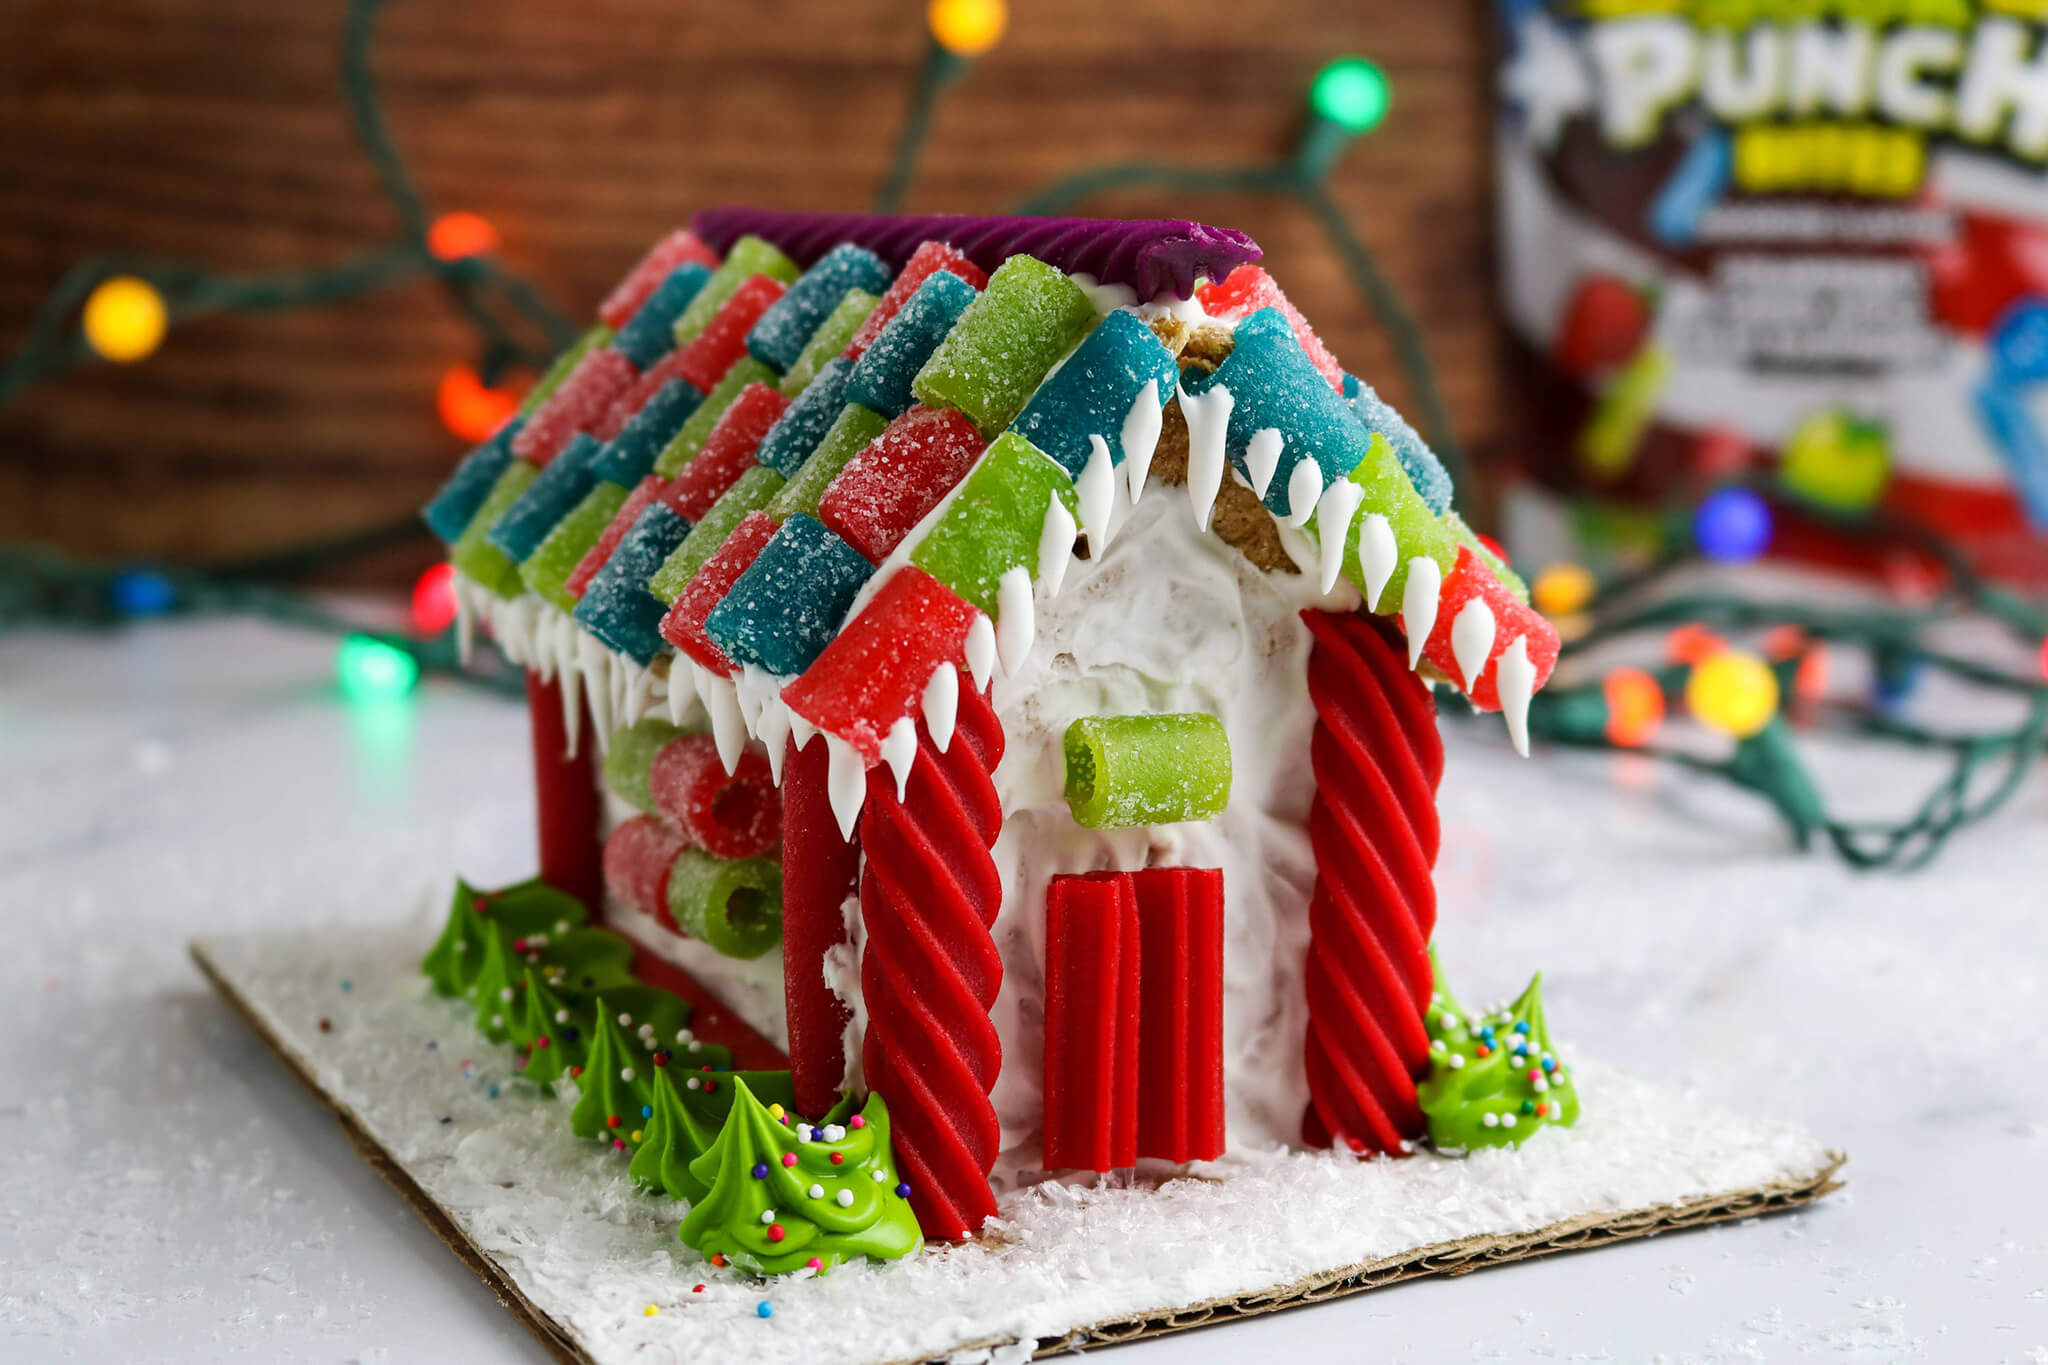 Graham Cracker Gingerbread House made with Red Vines and Sour Punch Candy